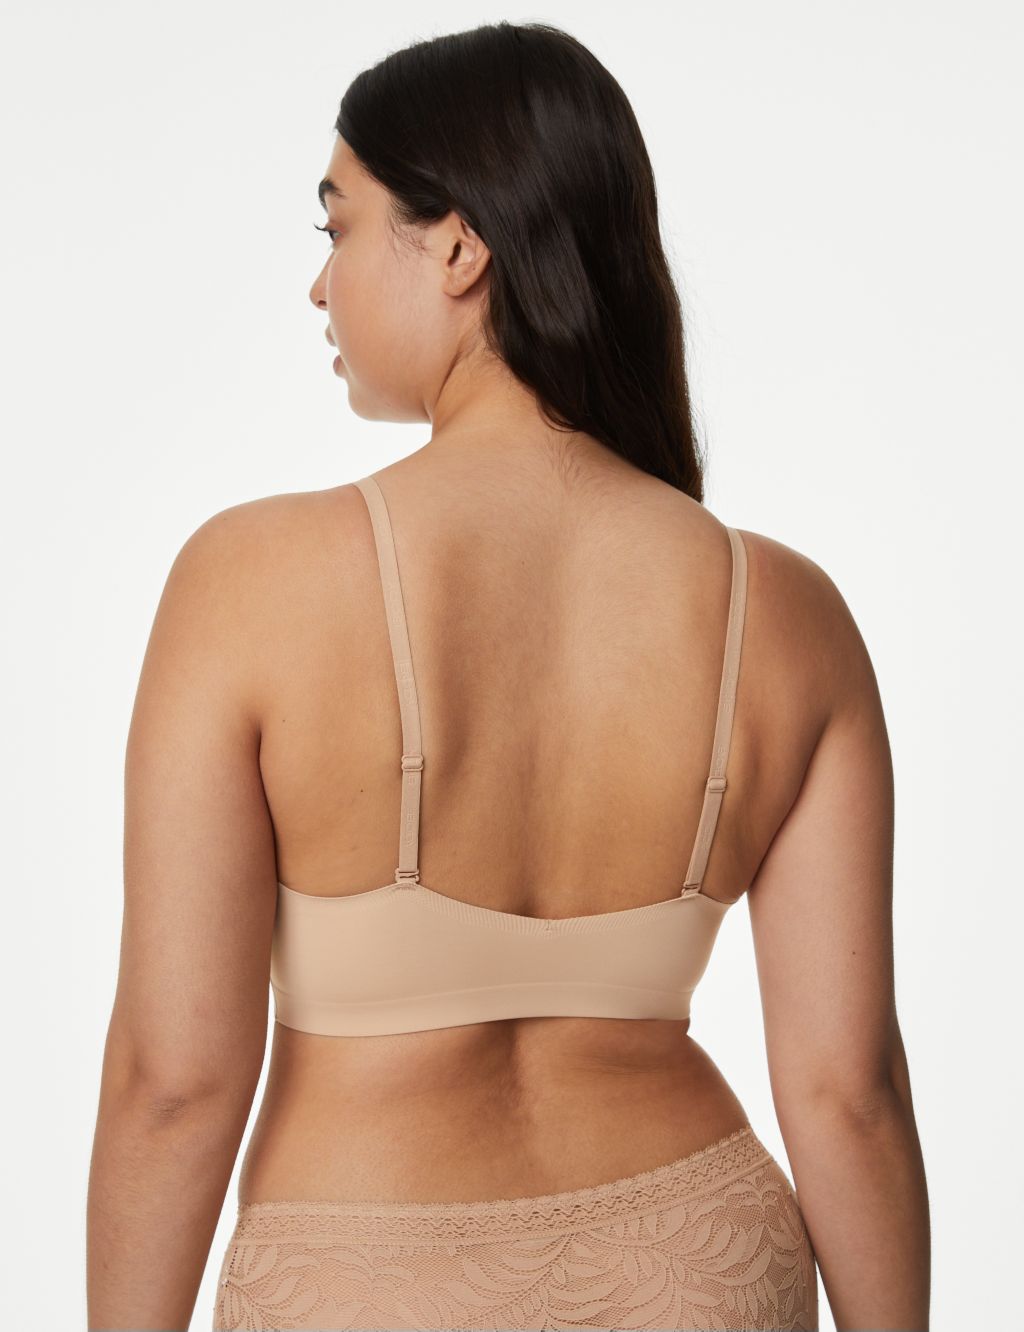 Flexifit™ Lace Non Wired Crop Top image 3